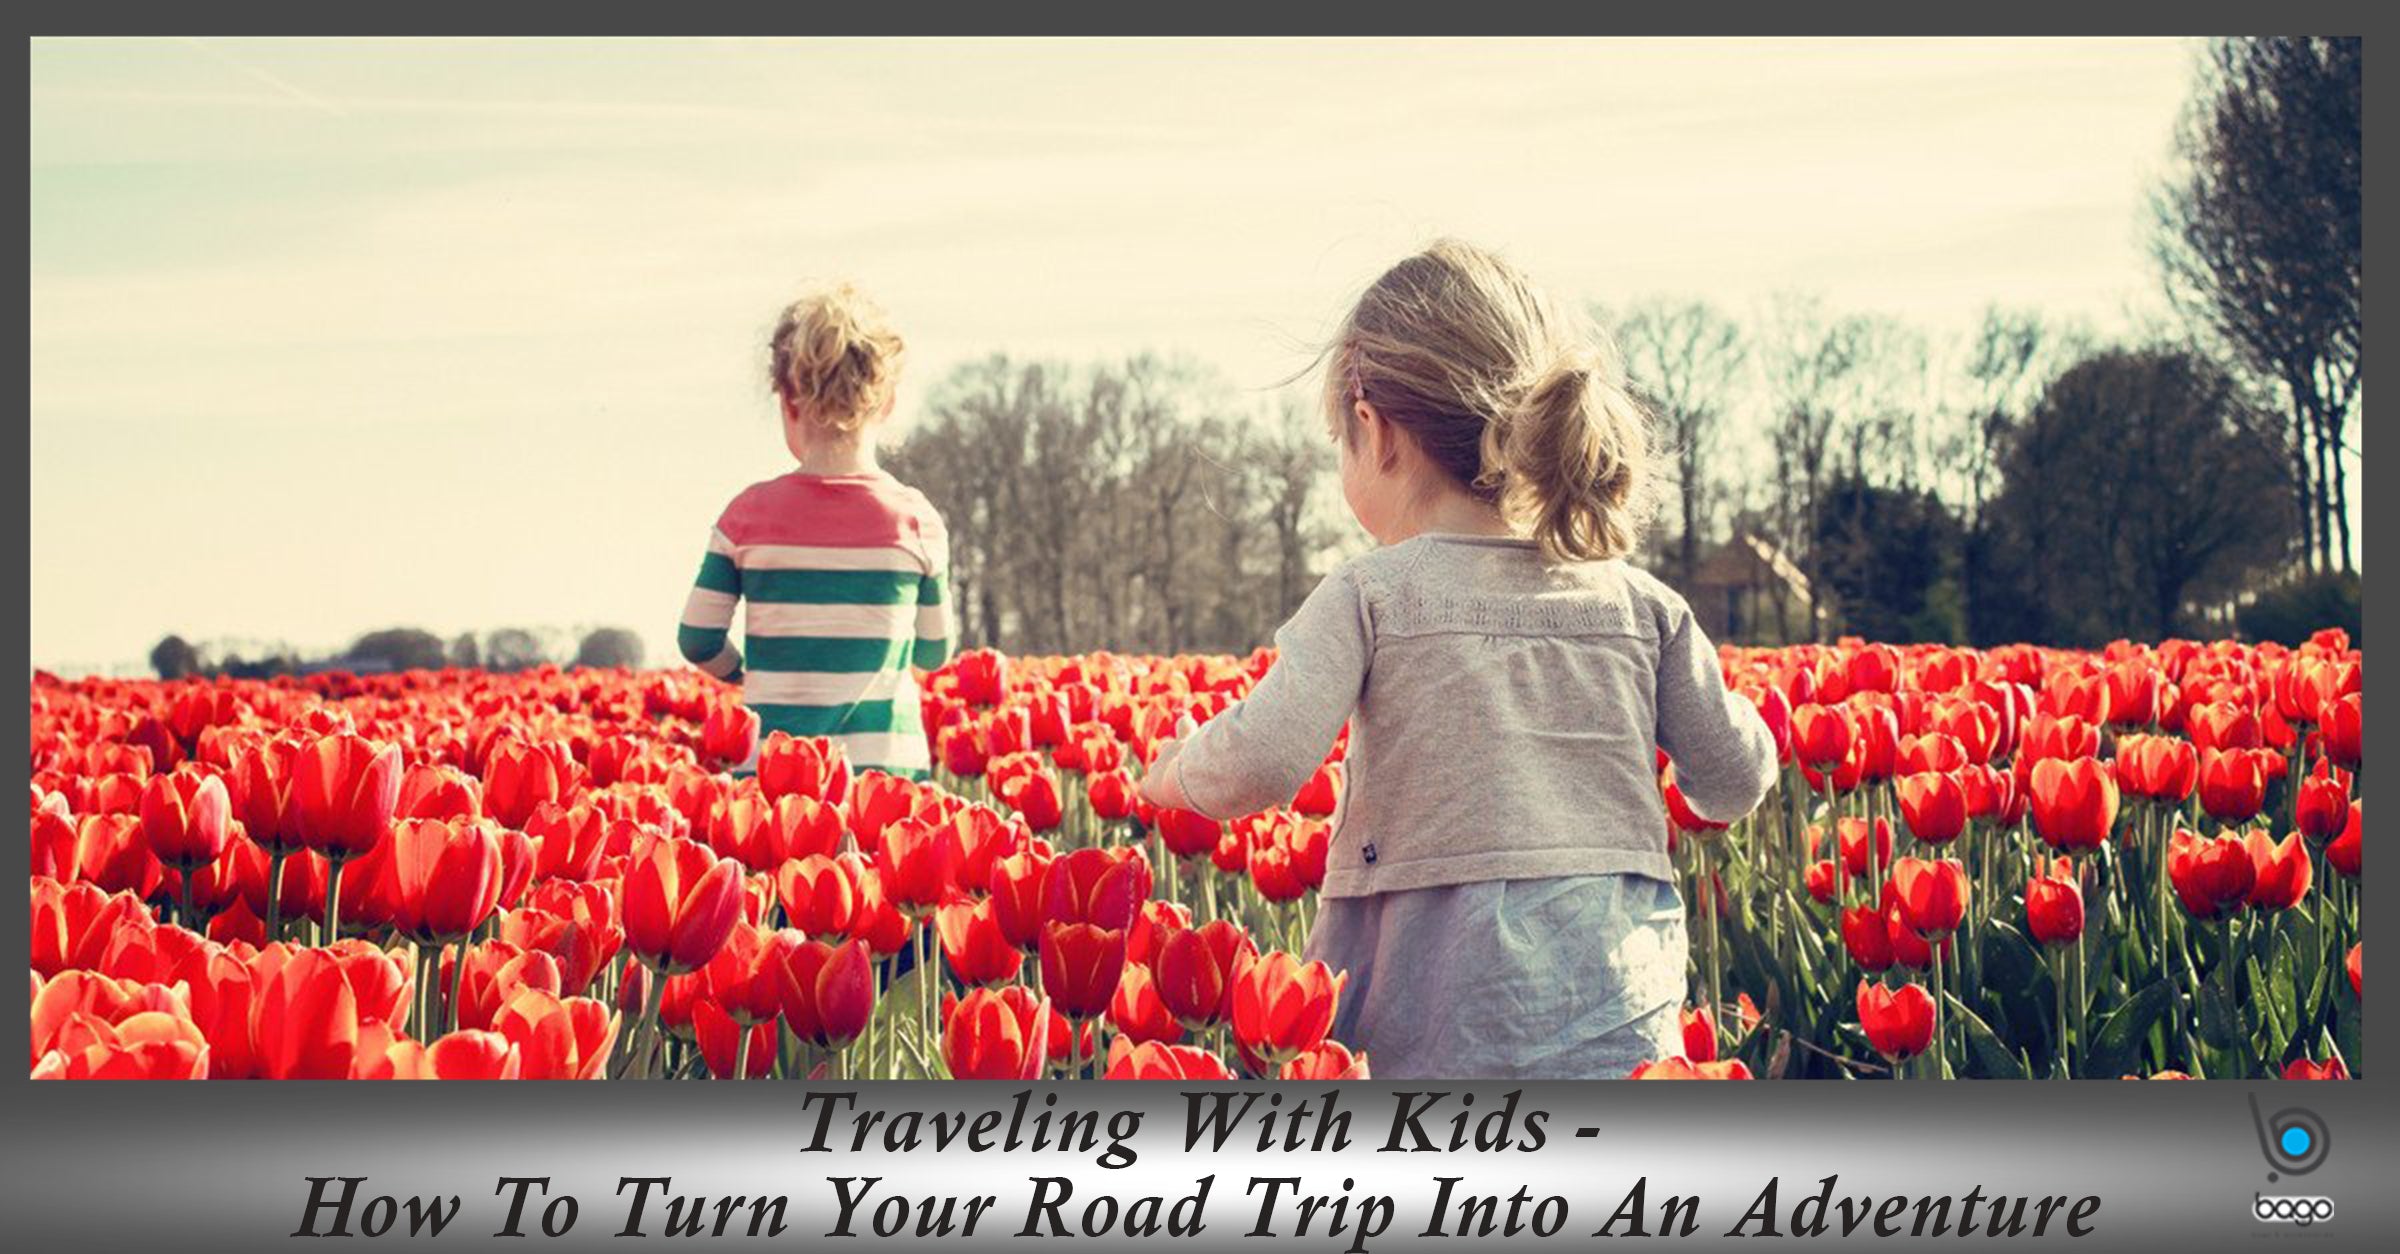 Traveling With Kids - How To Turn Your Road Trip Into An Adventure